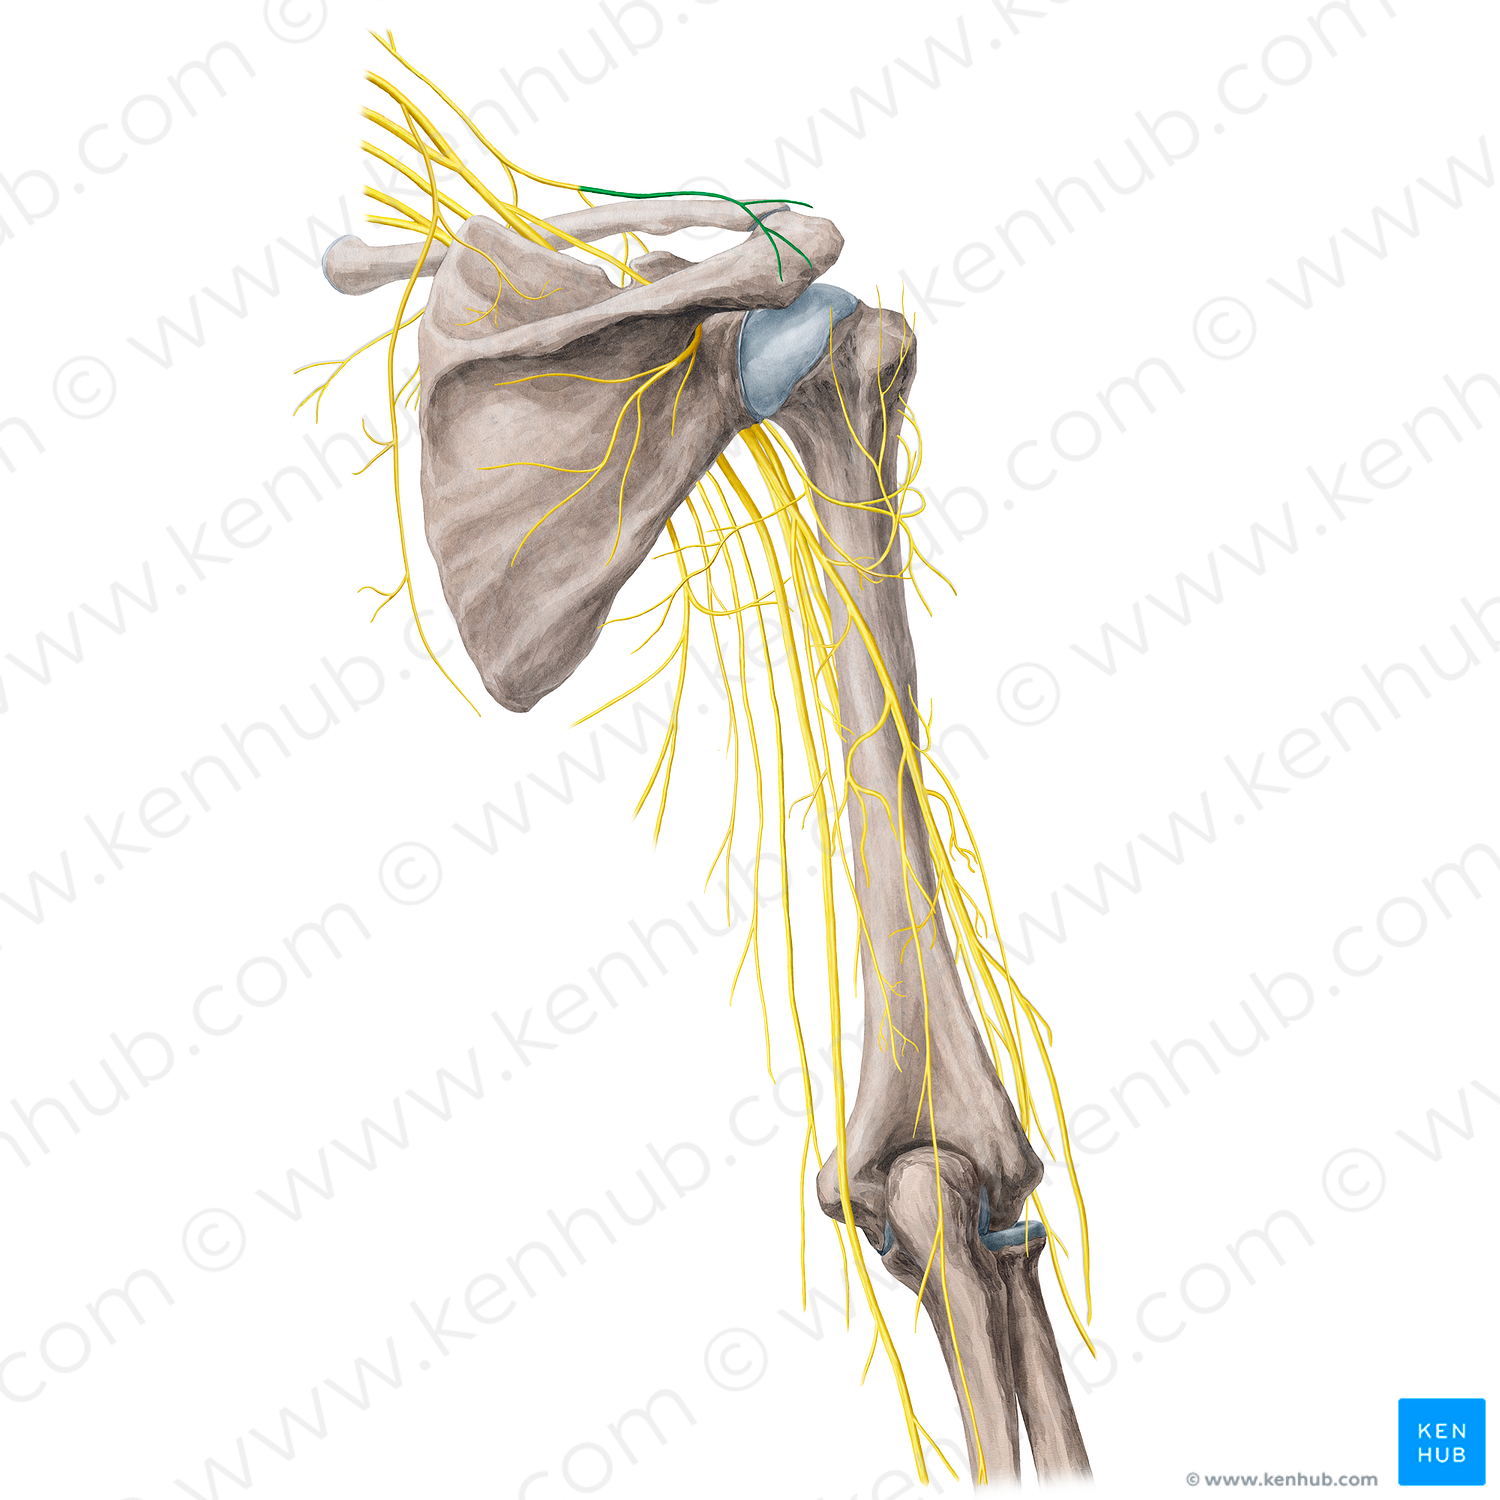 Lateral supraclavicular nerves (#21773)